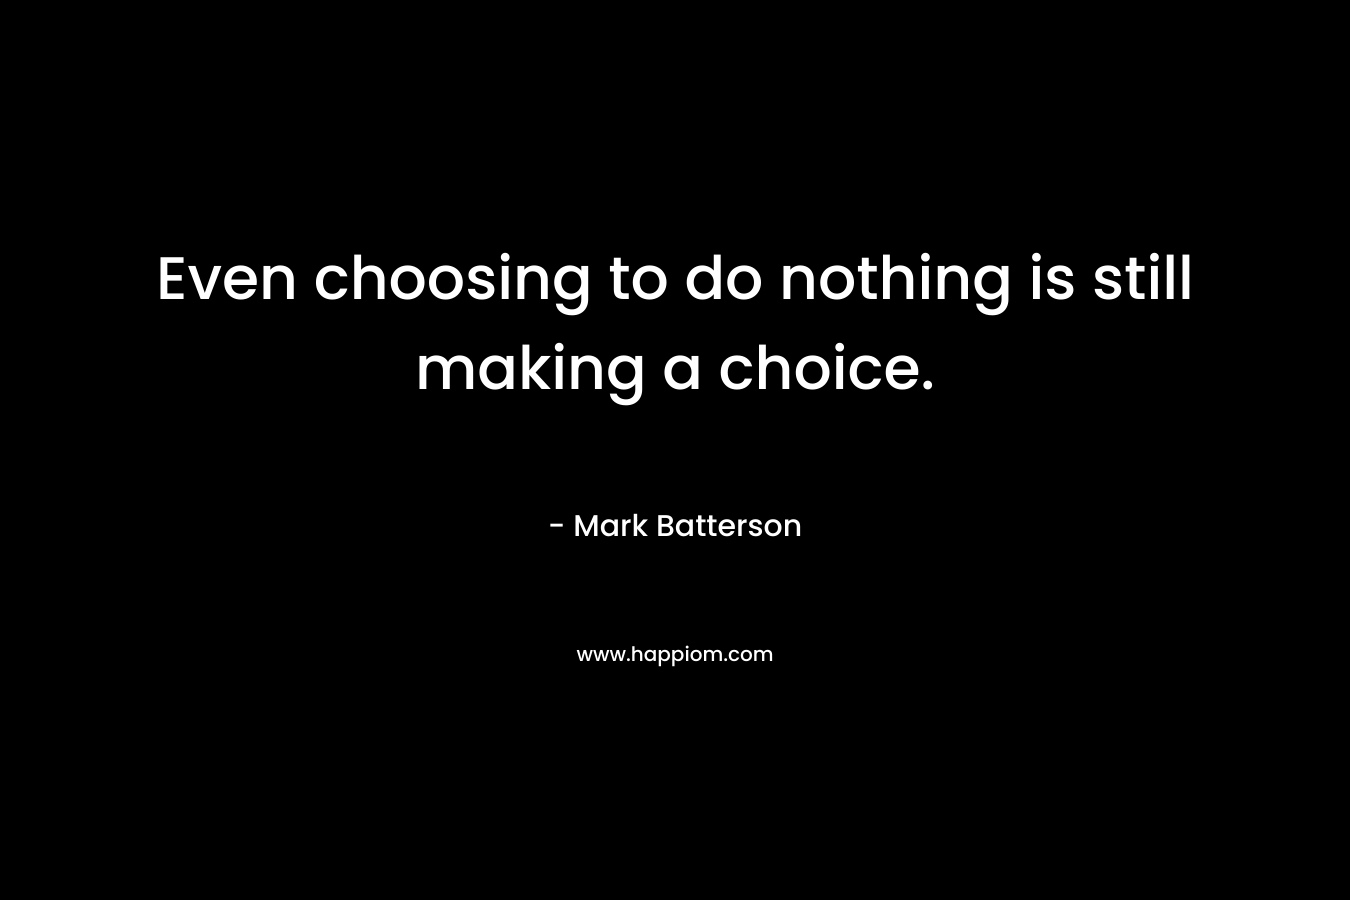 Even choosing to do nothing is still making a choice.